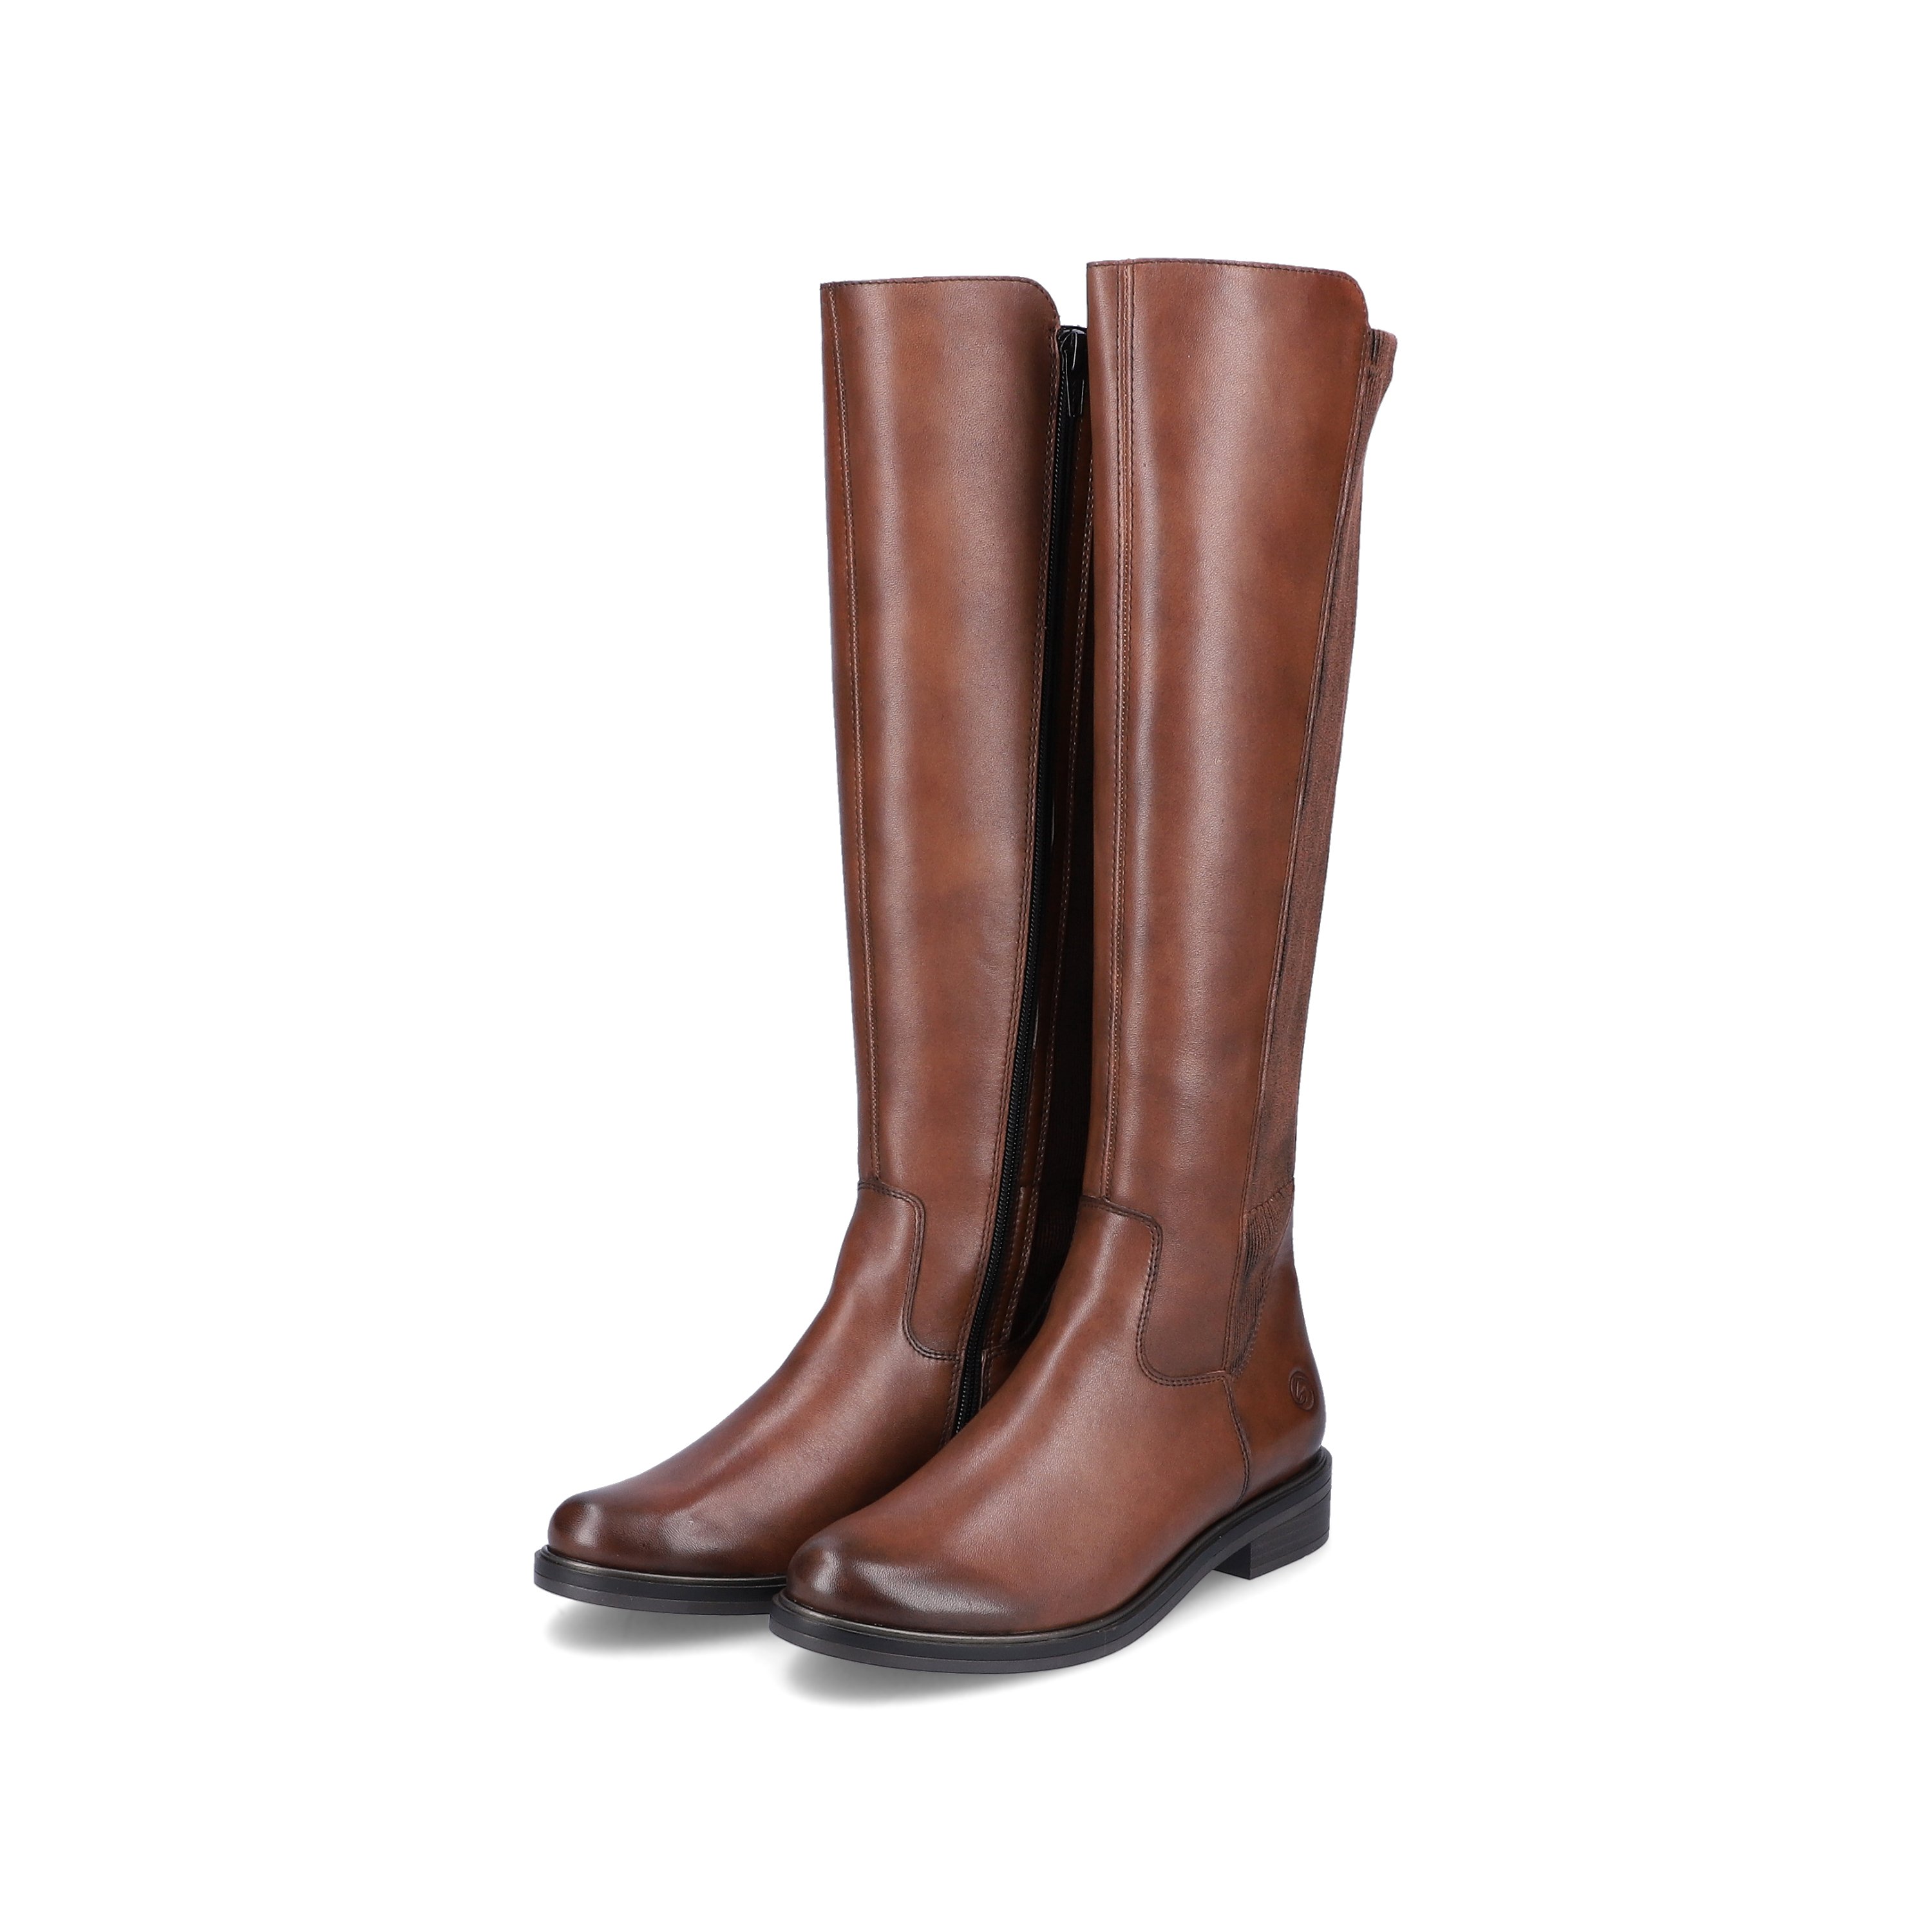 Hazel remonte women´s high boots D8371-25 with zipper as well as profile sole. Shoe laterally